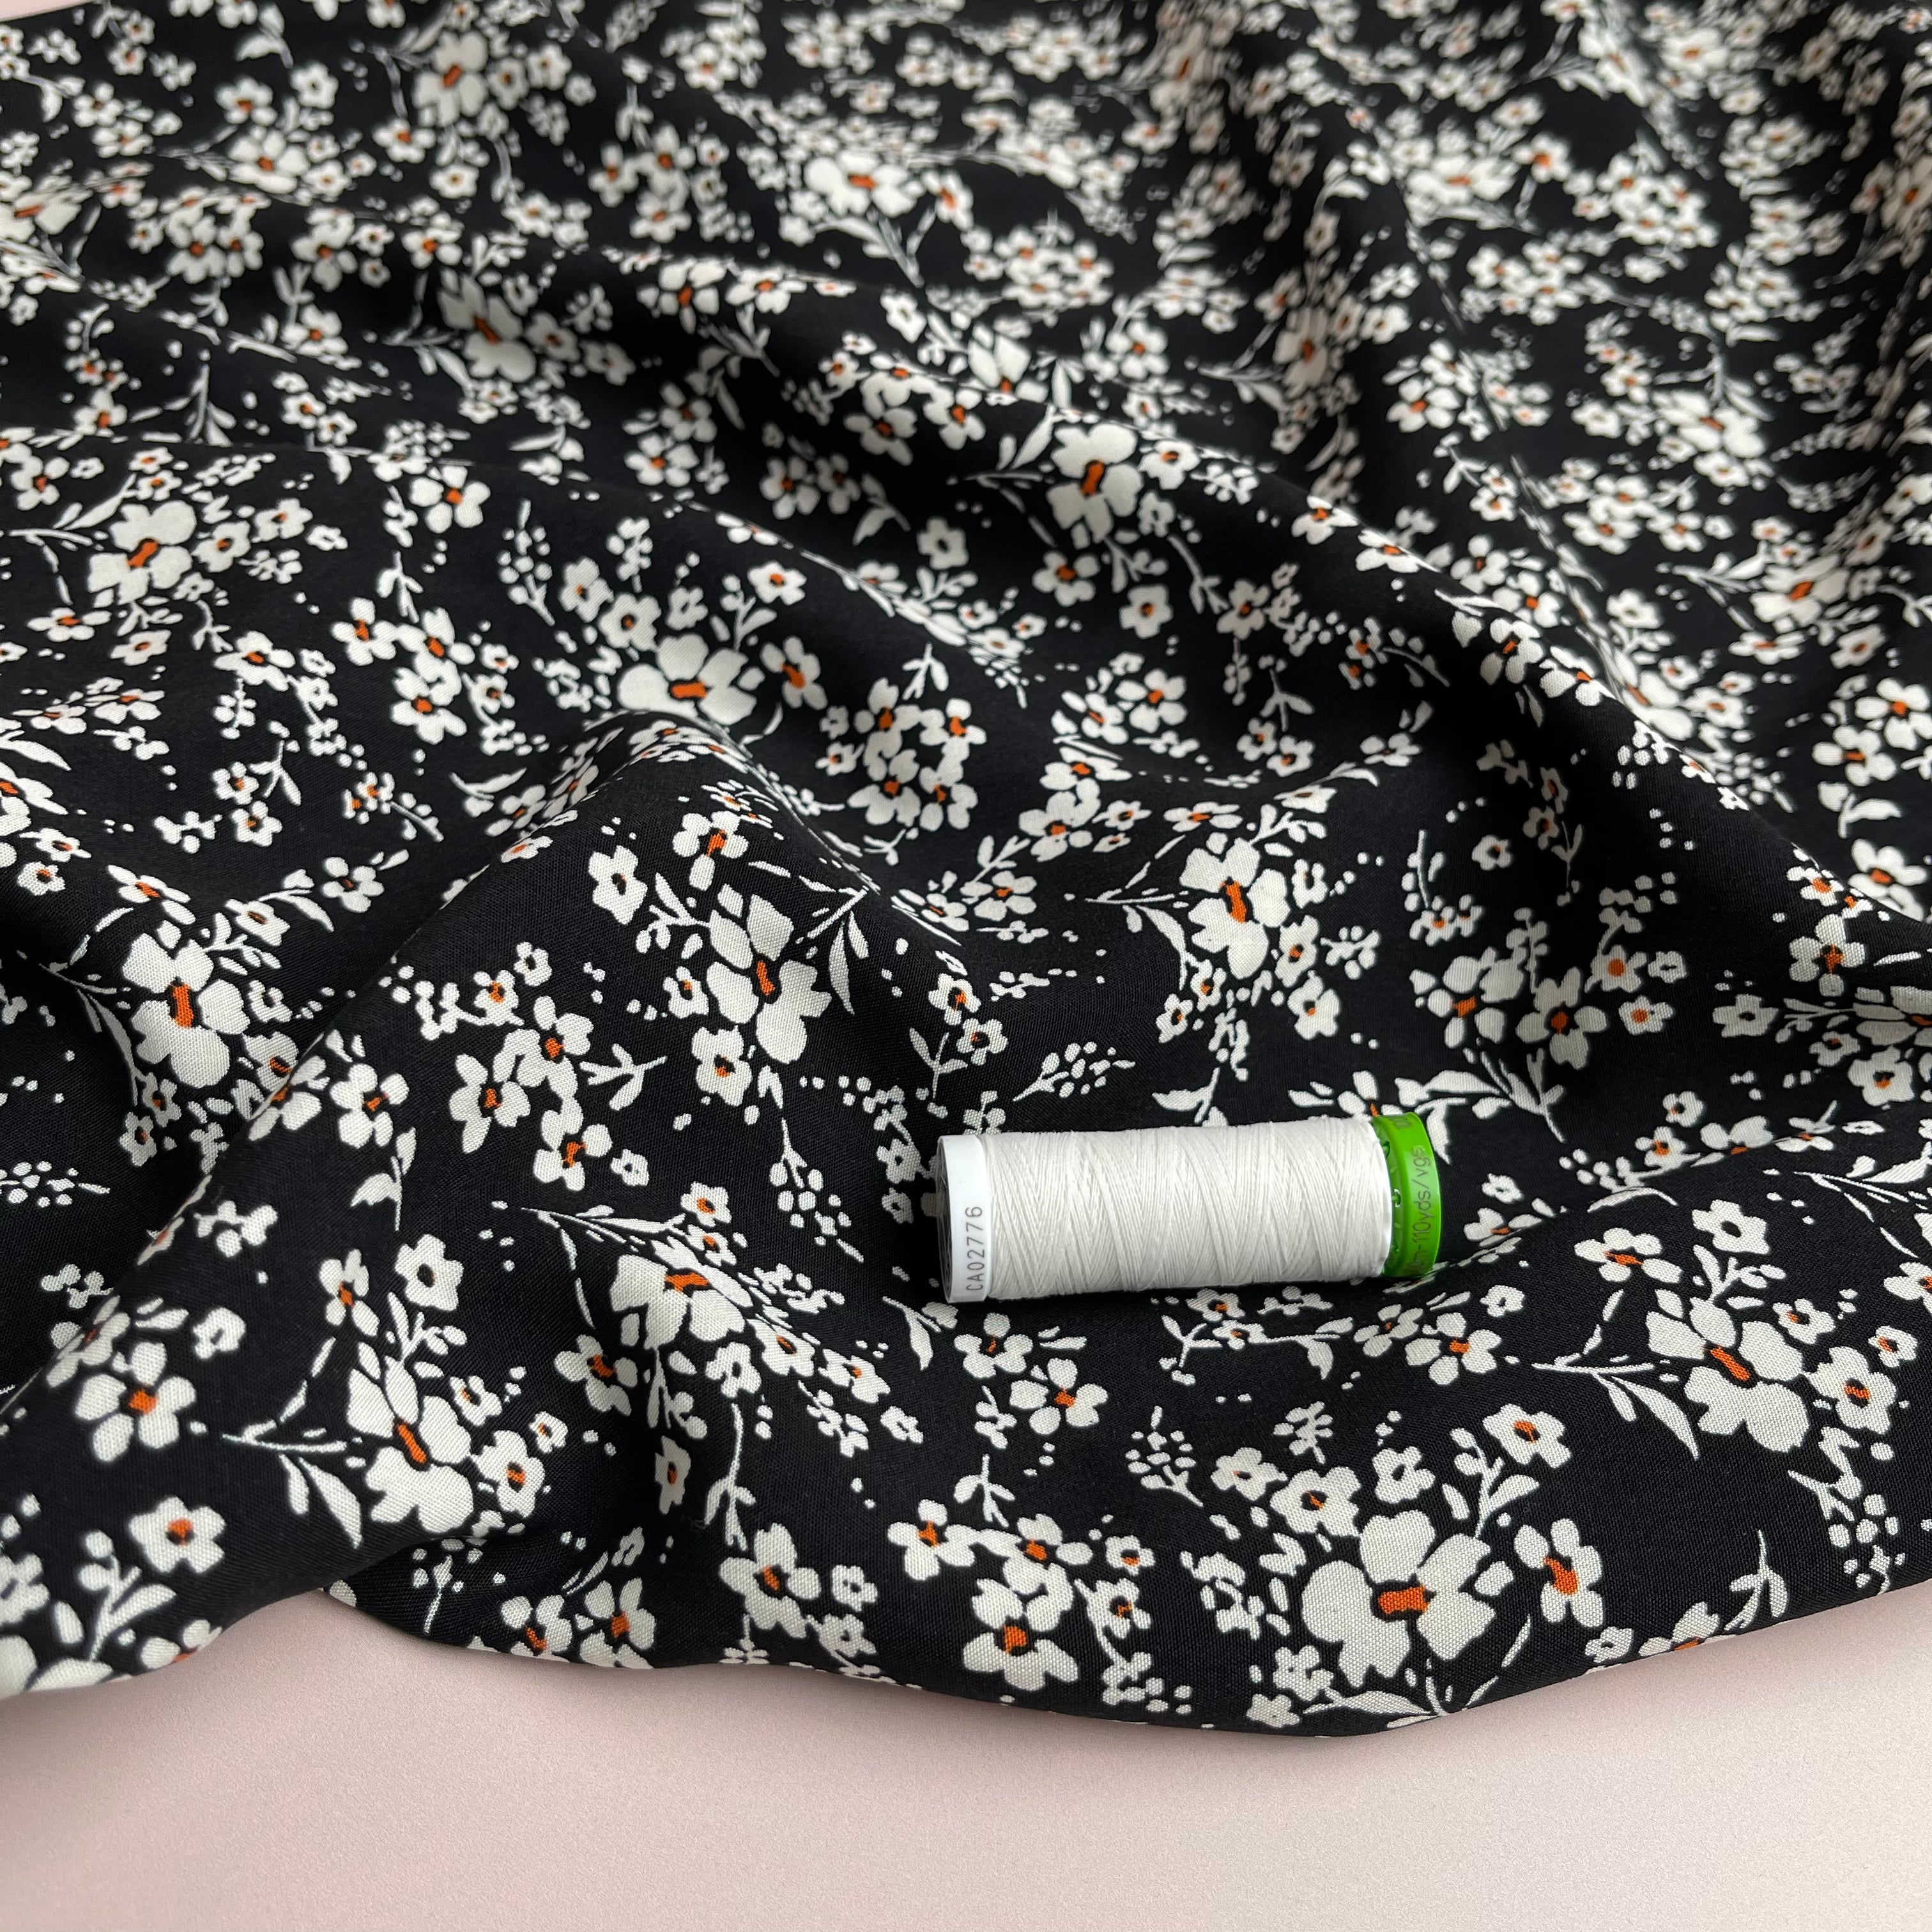 Ditsy Meadow on Black Viscose Fabric